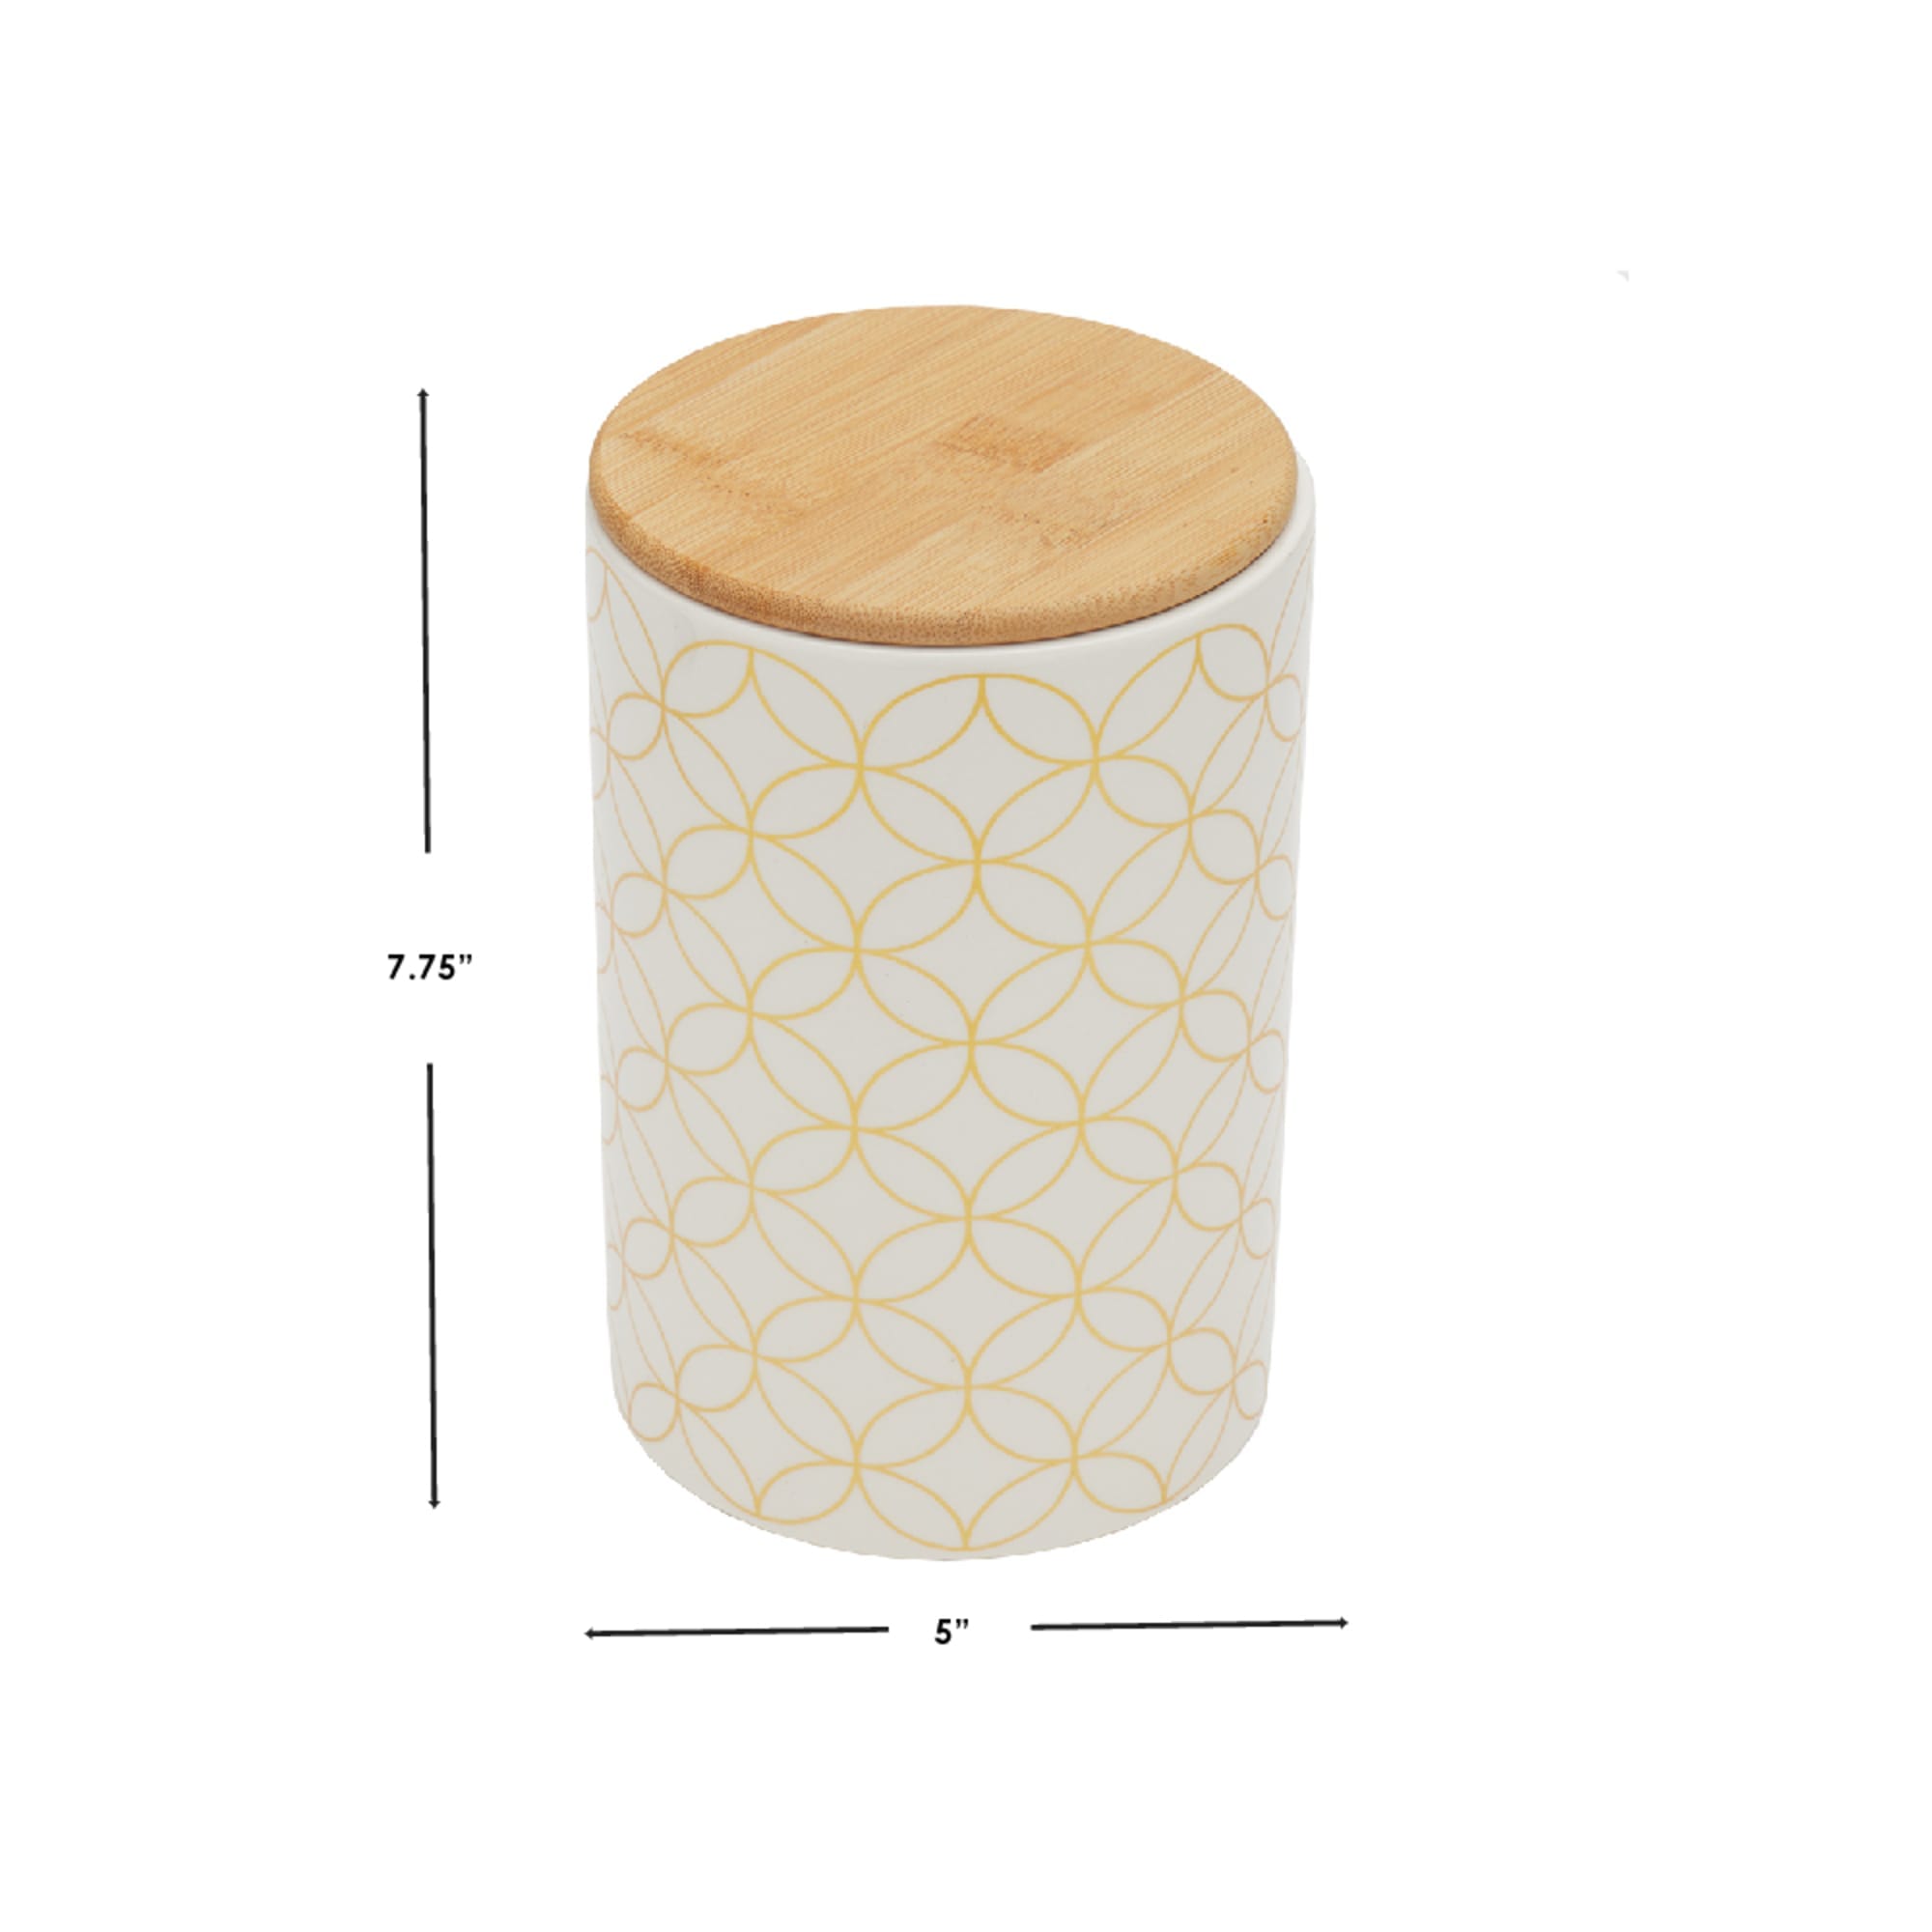 Home Basics Vescia Large Ceramic Canister with Bamboo Top $7.00 EACH, CASE PACK OF 12